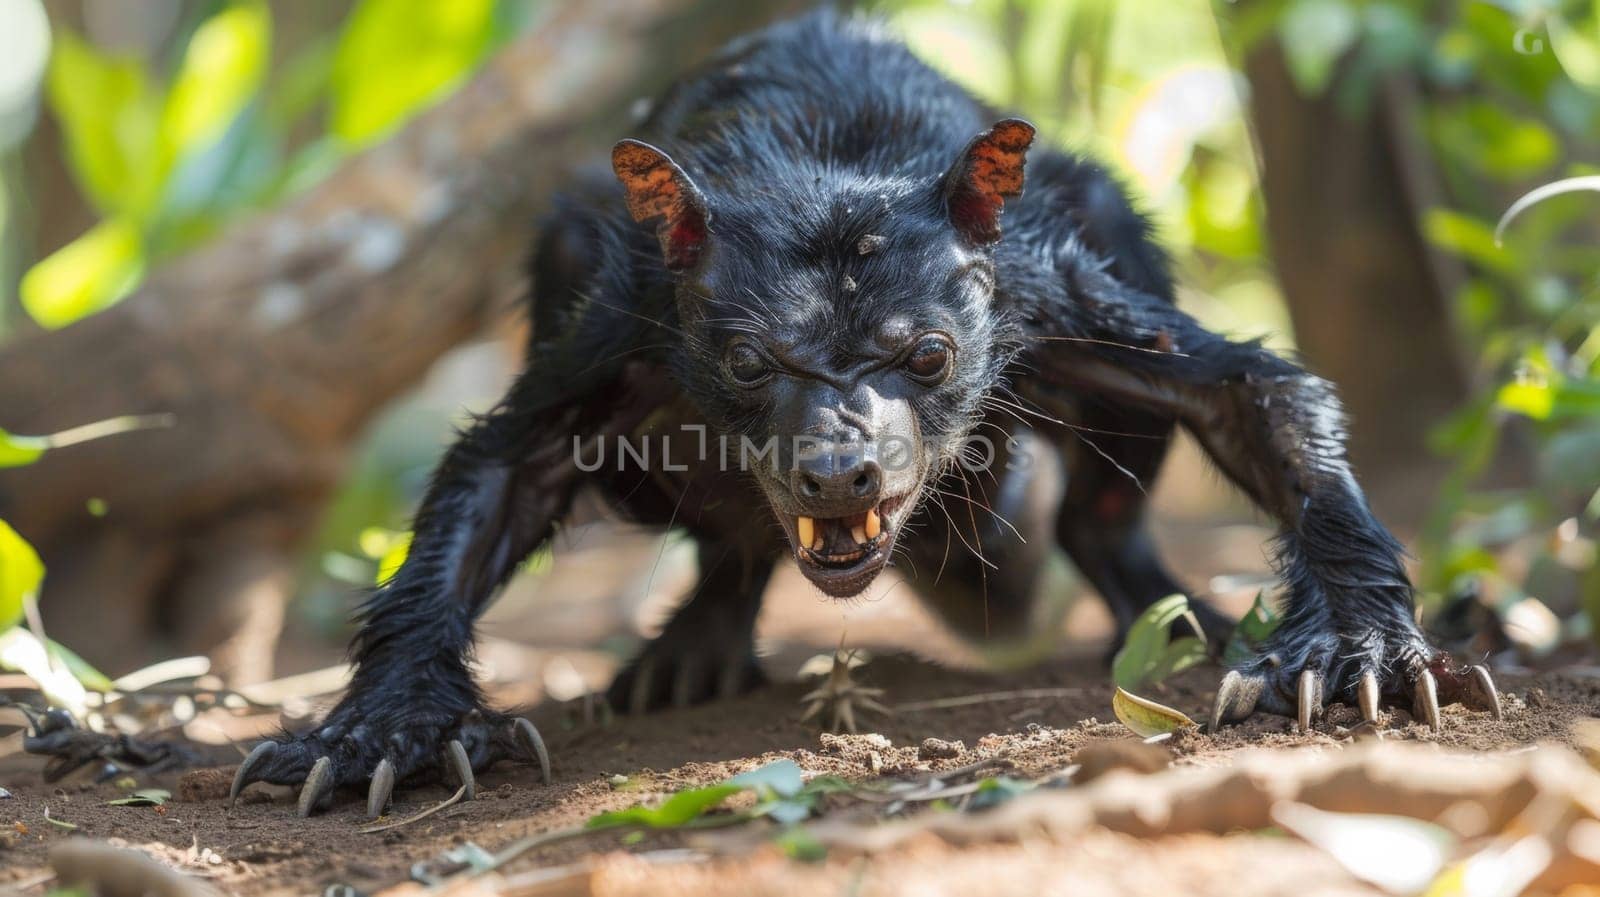 A black animal with large teeth and claws on the ground